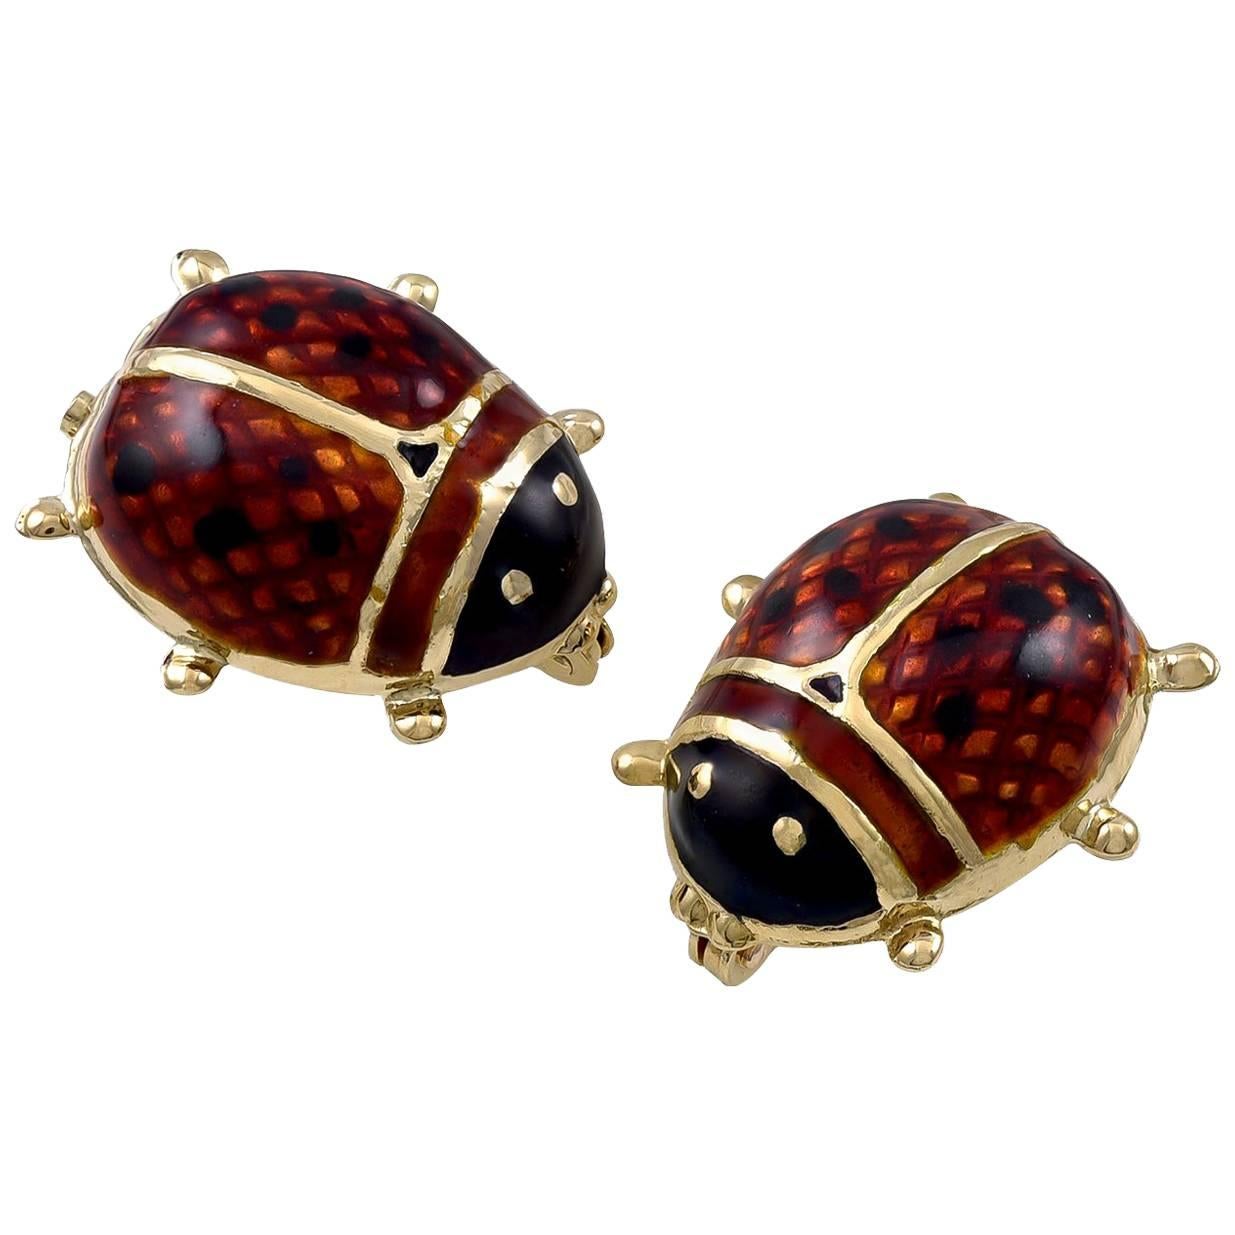 Enamel and Gold Lady Bug Pins